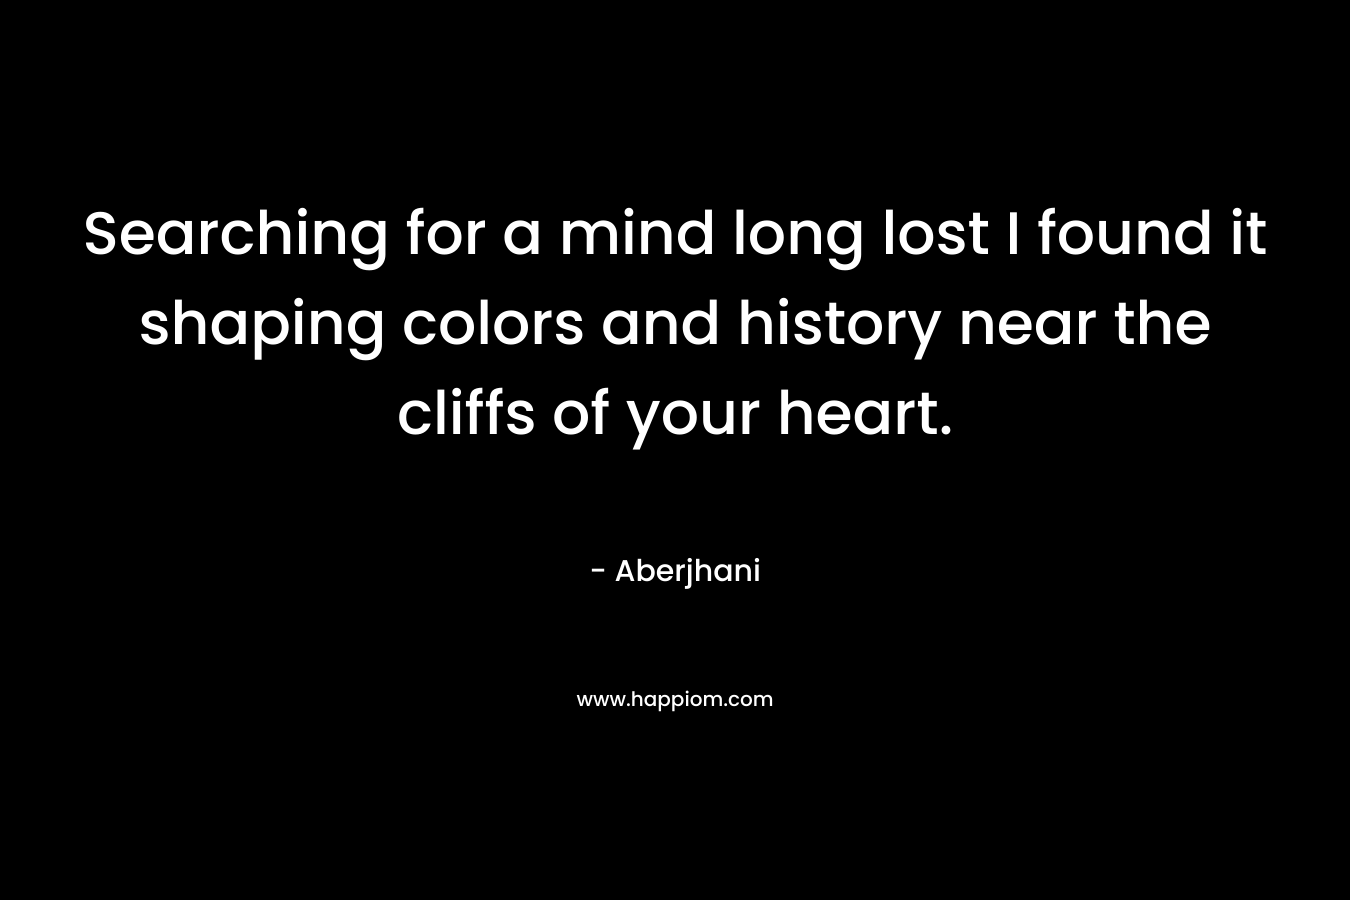 Searching for a mind long lost I found it shaping colors and history near the cliffs of your heart.